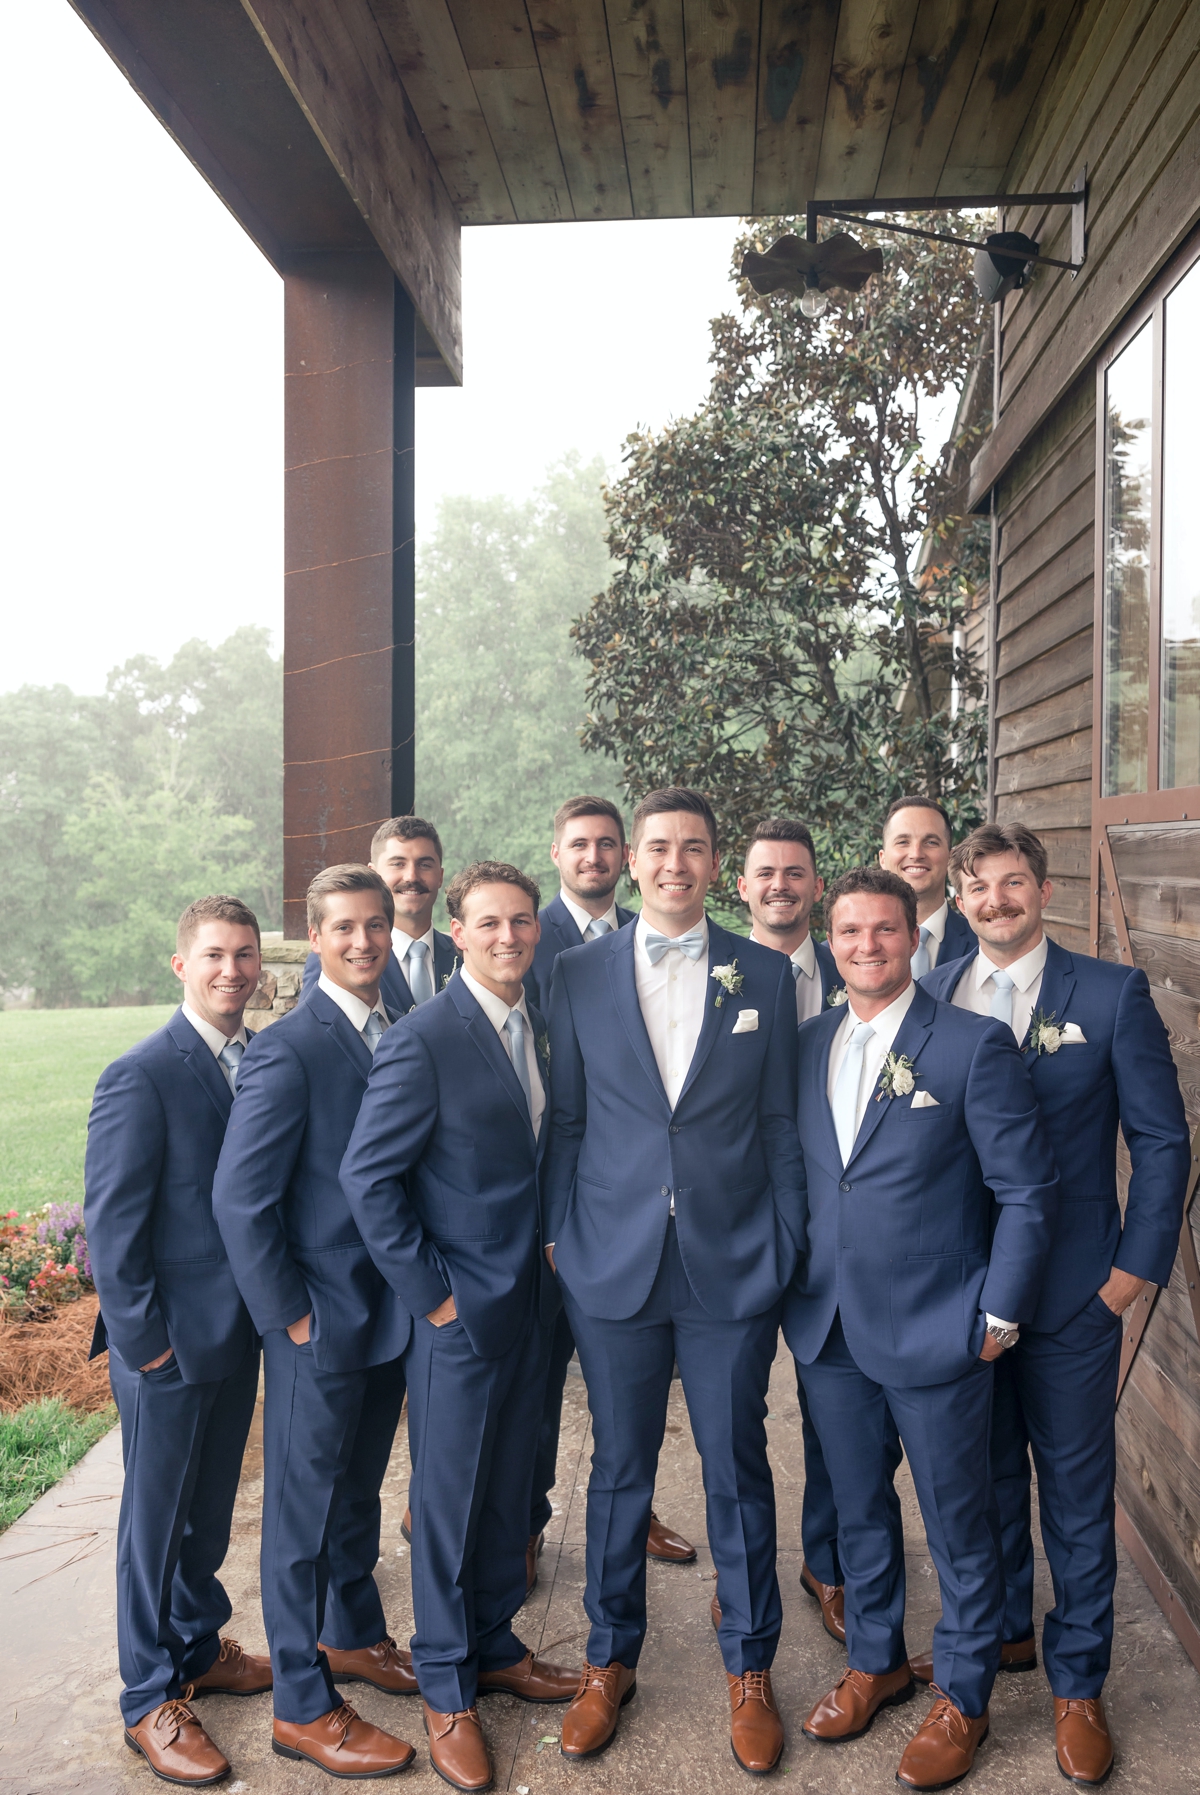 Chris and his groomsmen in their blue wedding day suits smiling under the porch overhanging of Walters Barn in Lula GA on his wedding day.